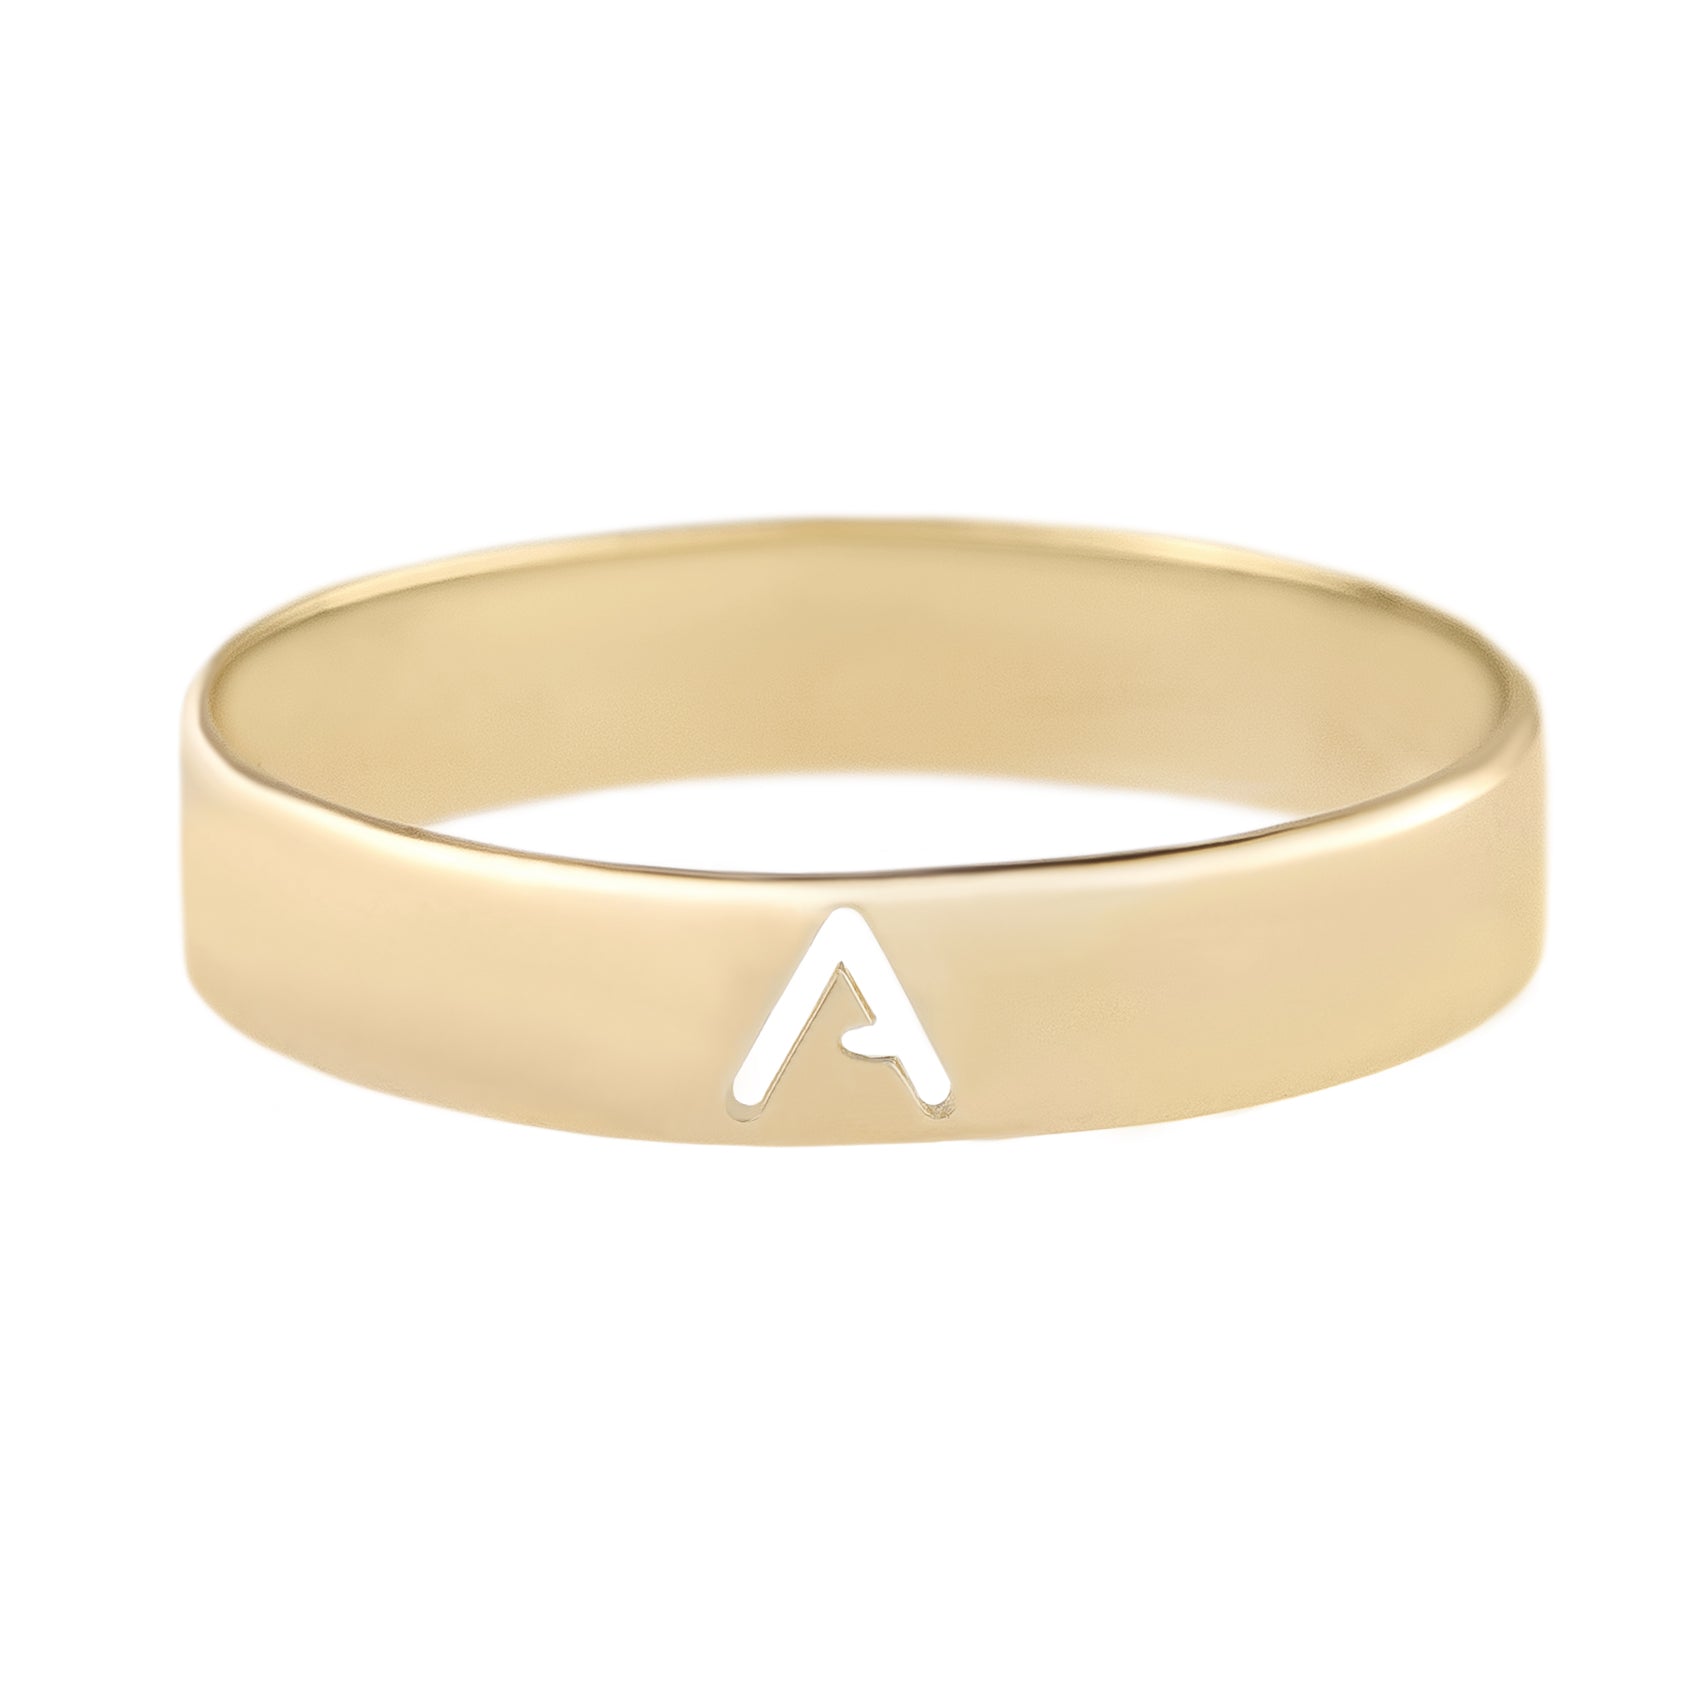 Metier by Tomfoolery: Gold Alphabet Rings